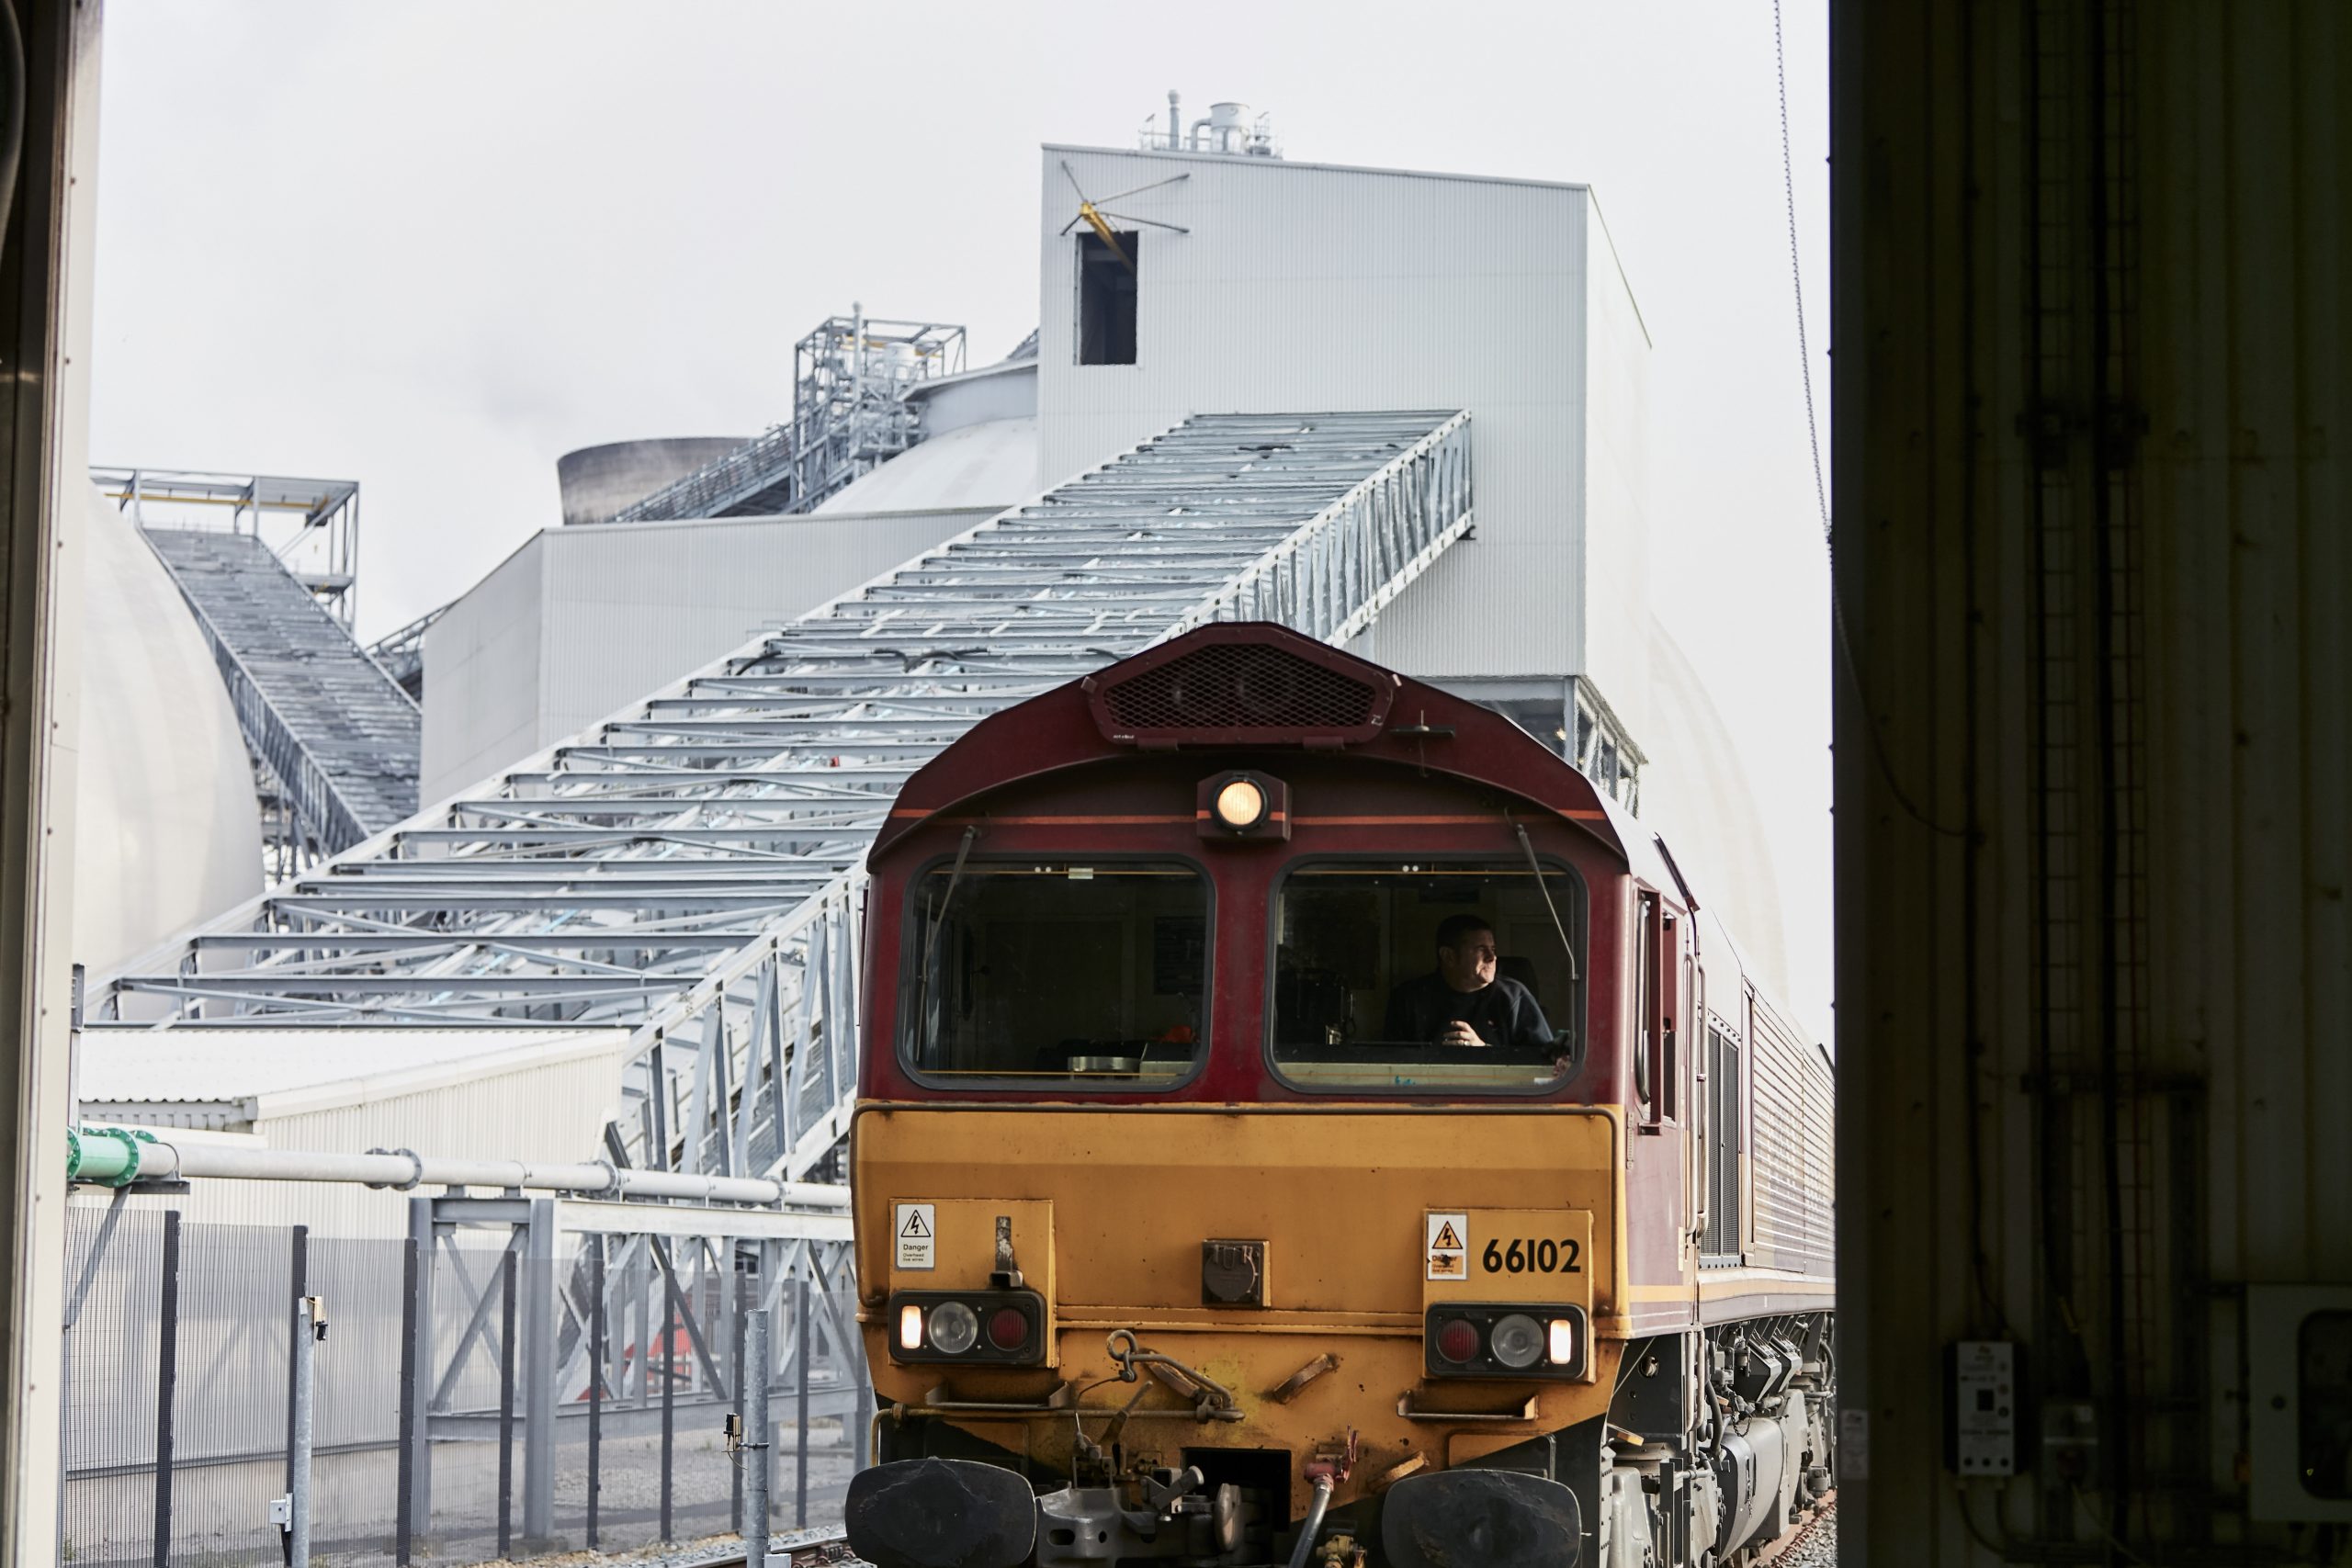 Train arriving at Selby, Selby Power Station, Yorkshire, UK, 2019